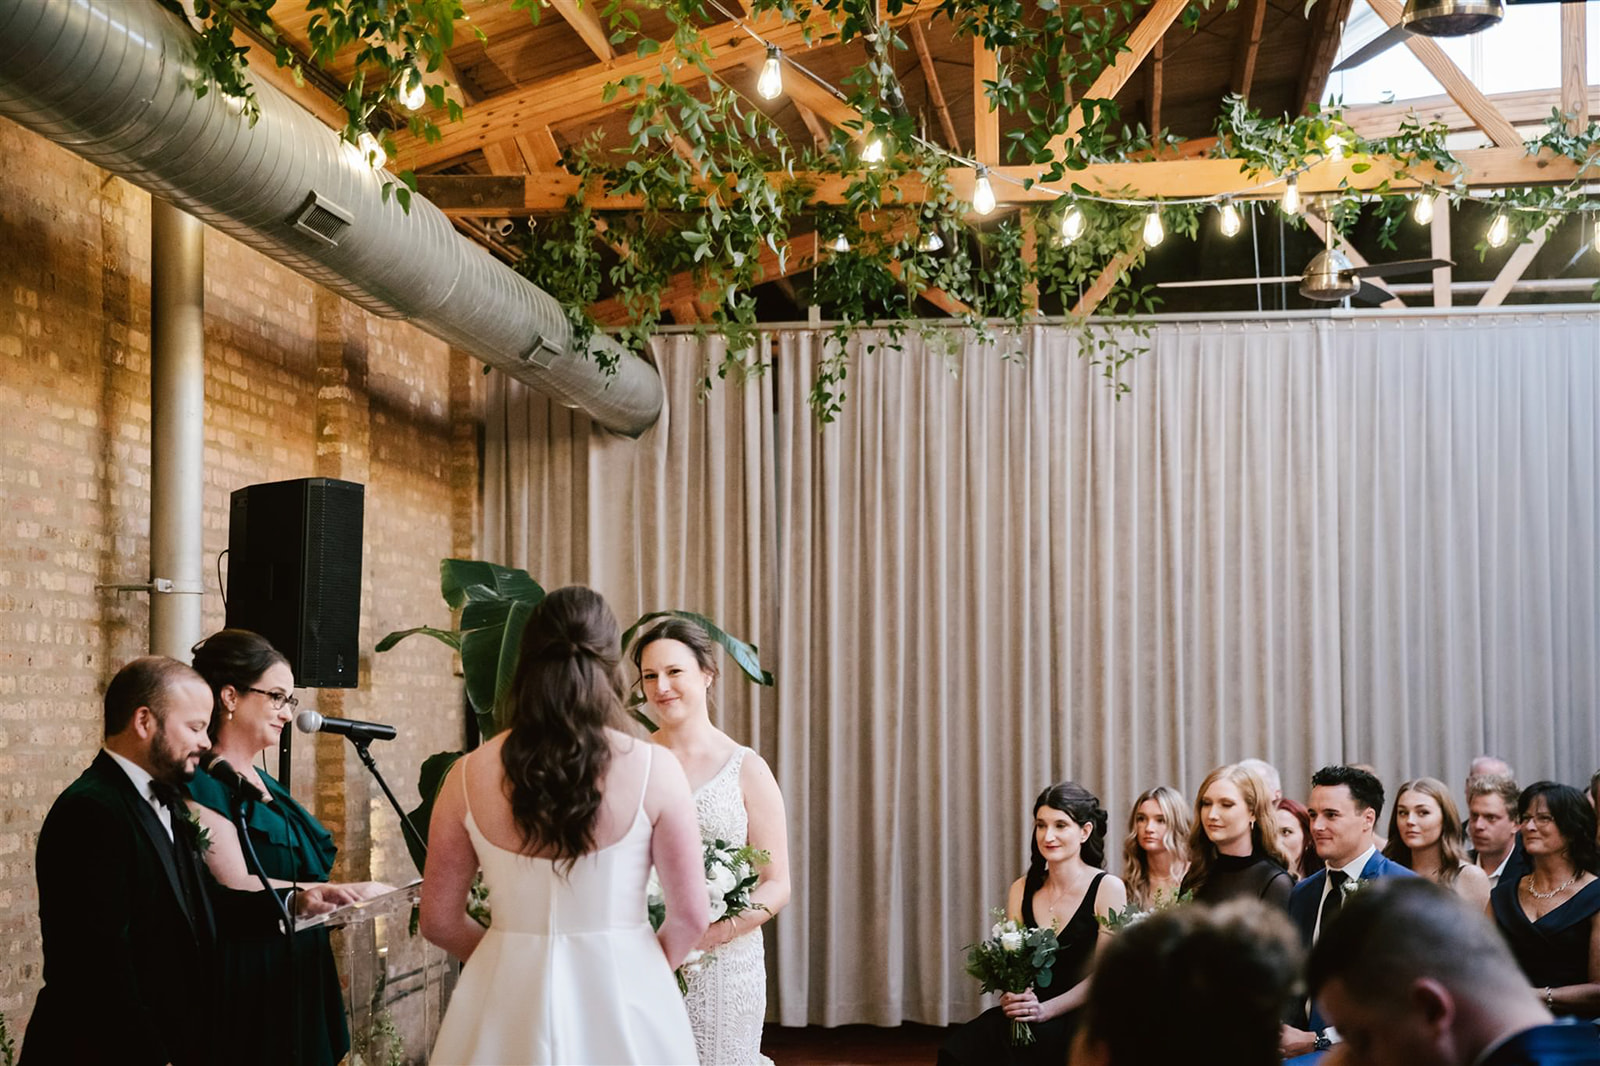 Two brides at their ceremony, sharing heartfelt moments and celebrating their love at Loft on Lake.